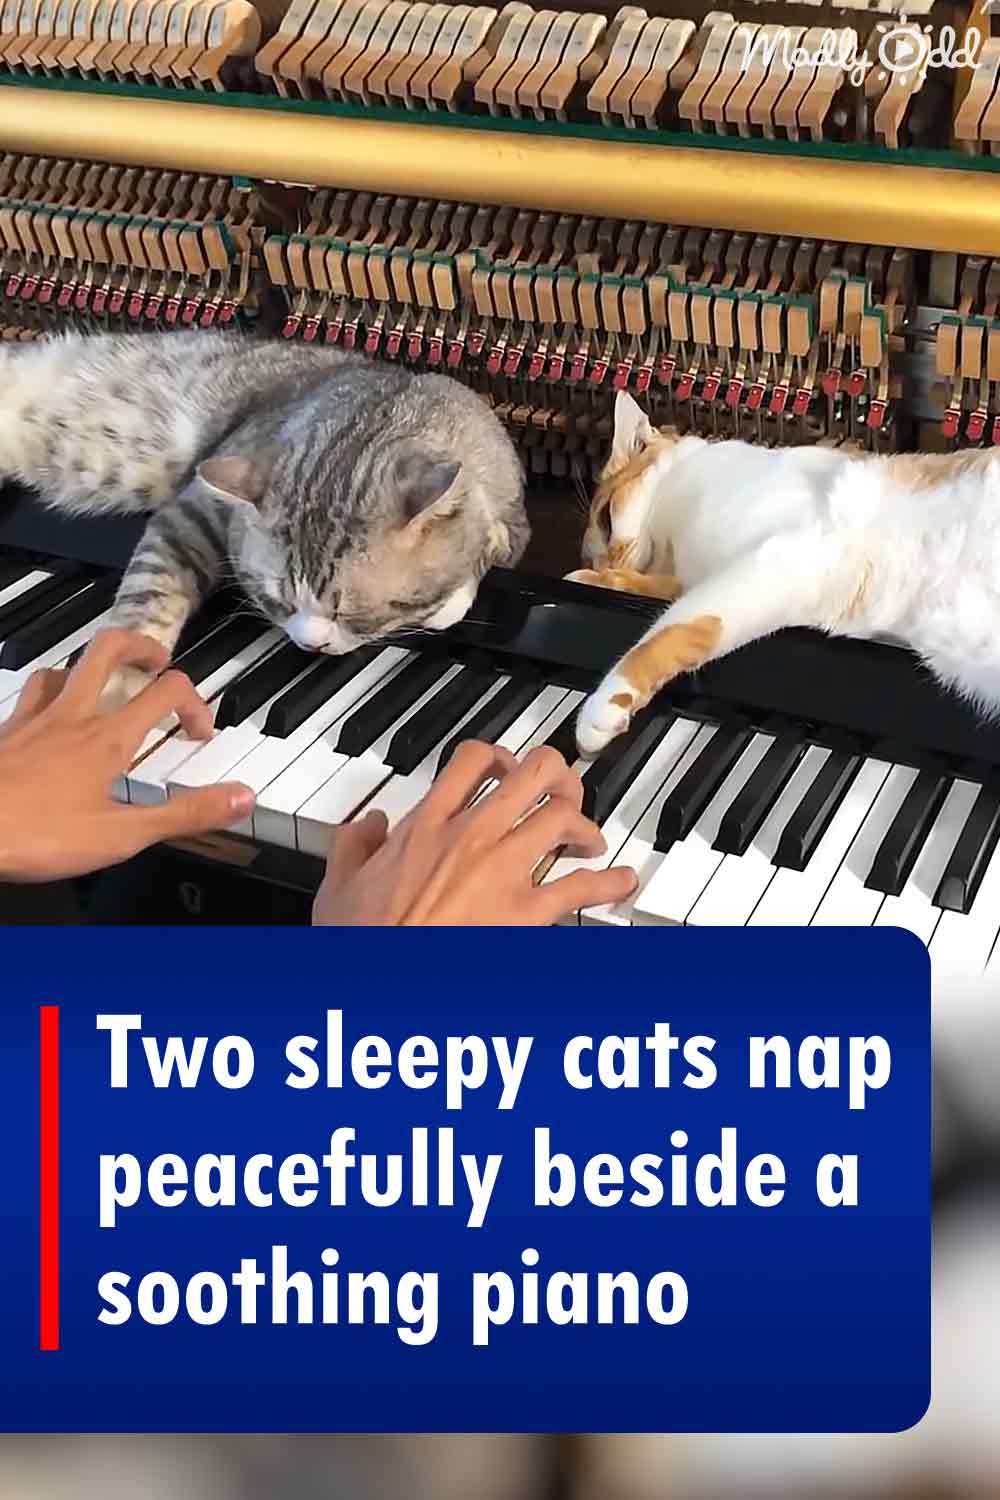 Two sleepy cats nap peacefully beside a soothing piano